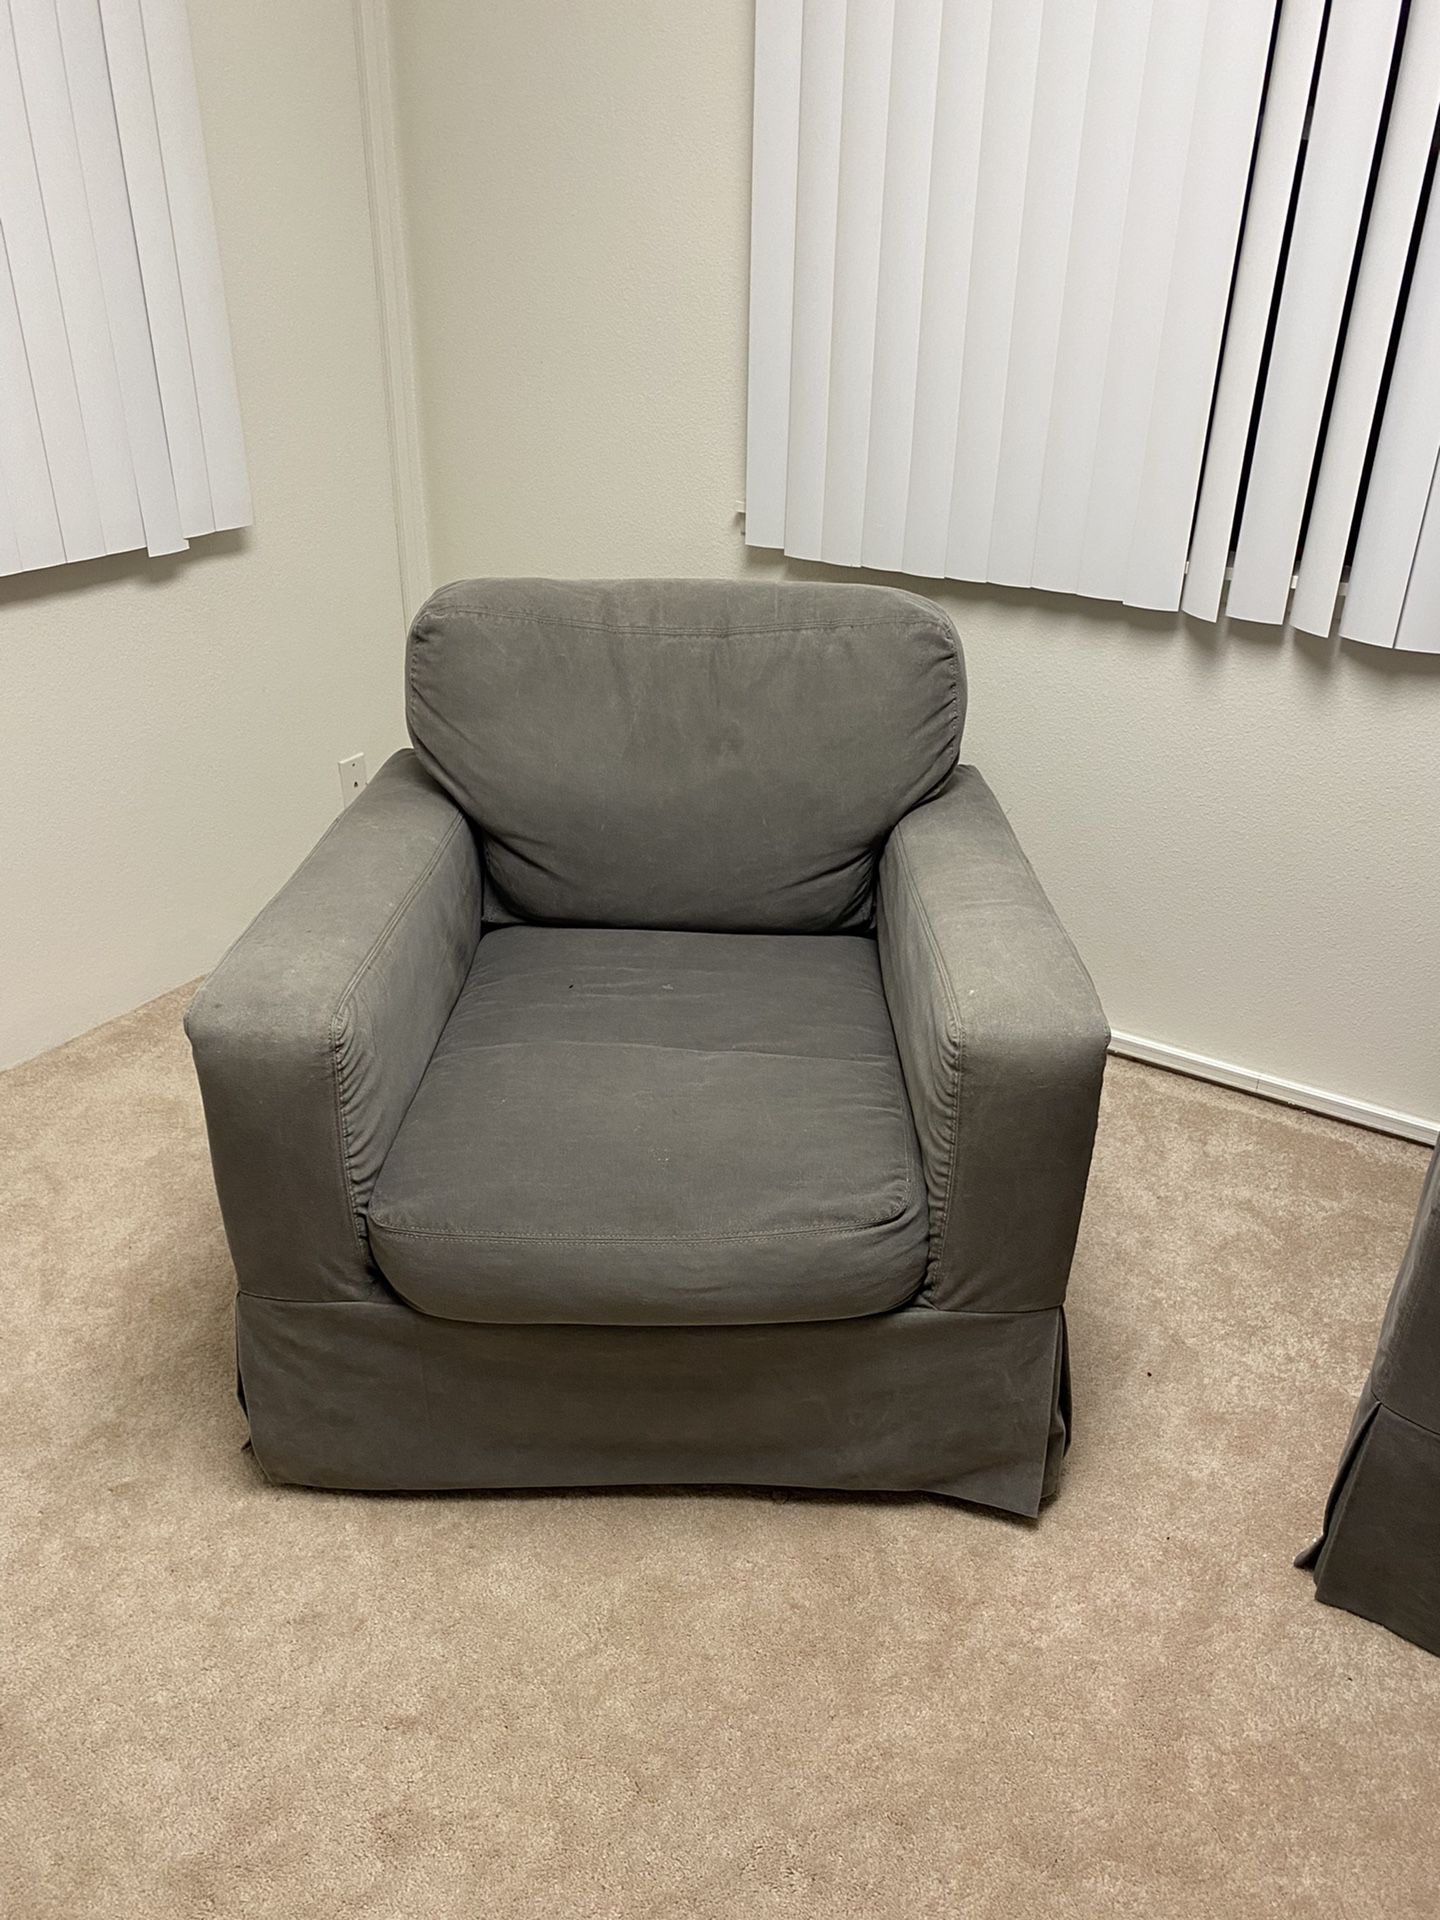 Couch and Swivel Rocker Chair